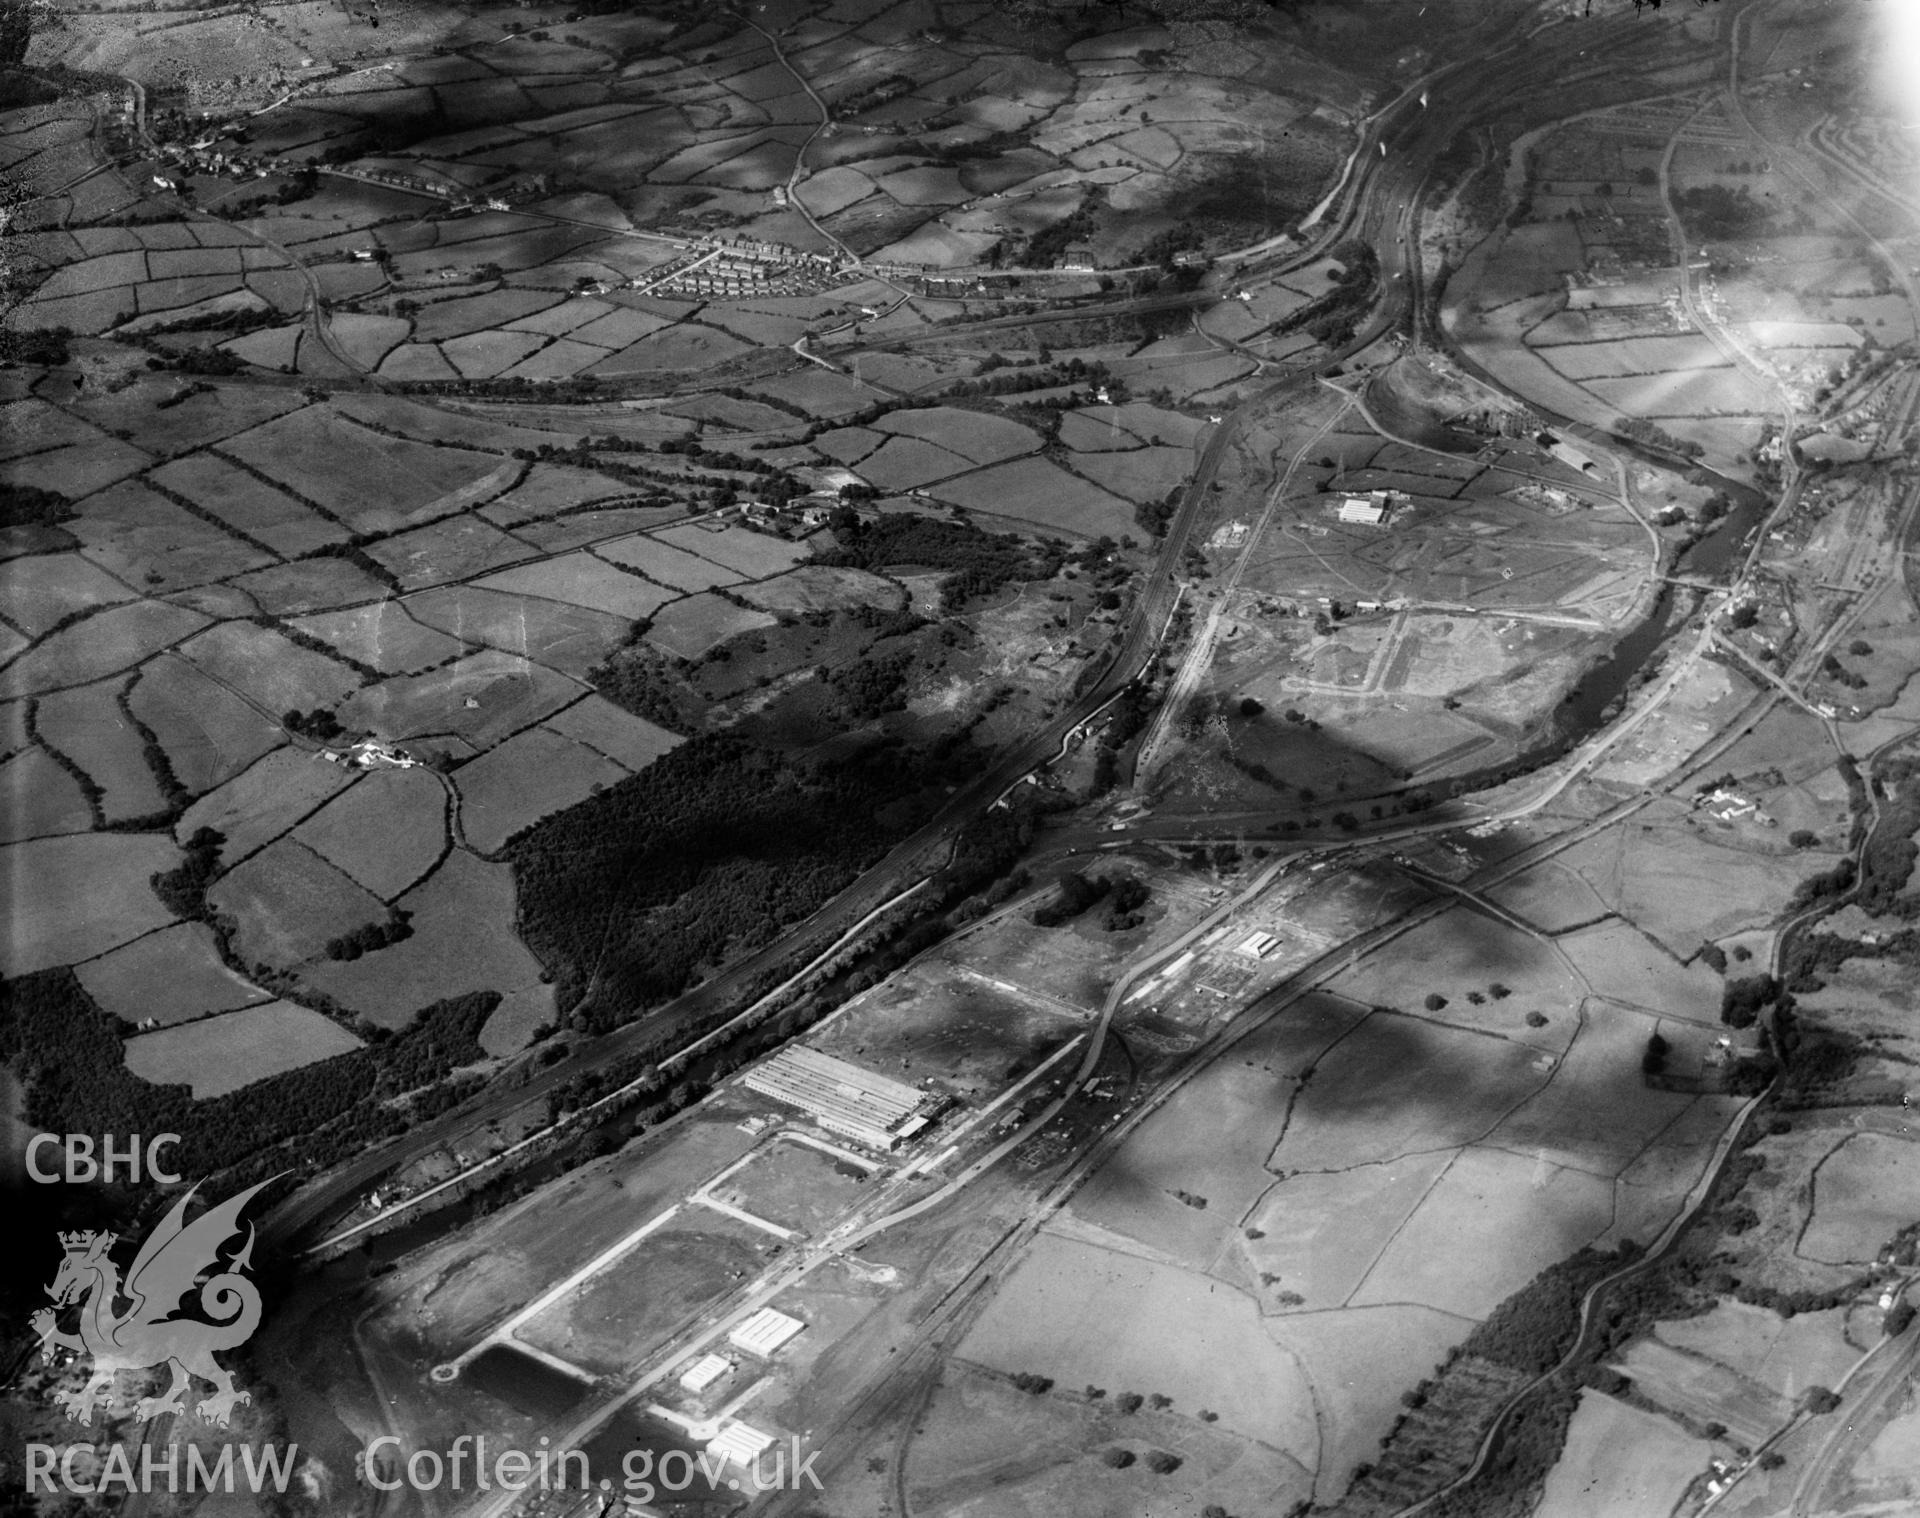 View of site of Treforest Industrial Estate prior to construction, oblique aerial view. 5?x4? black and white glass plate negative.